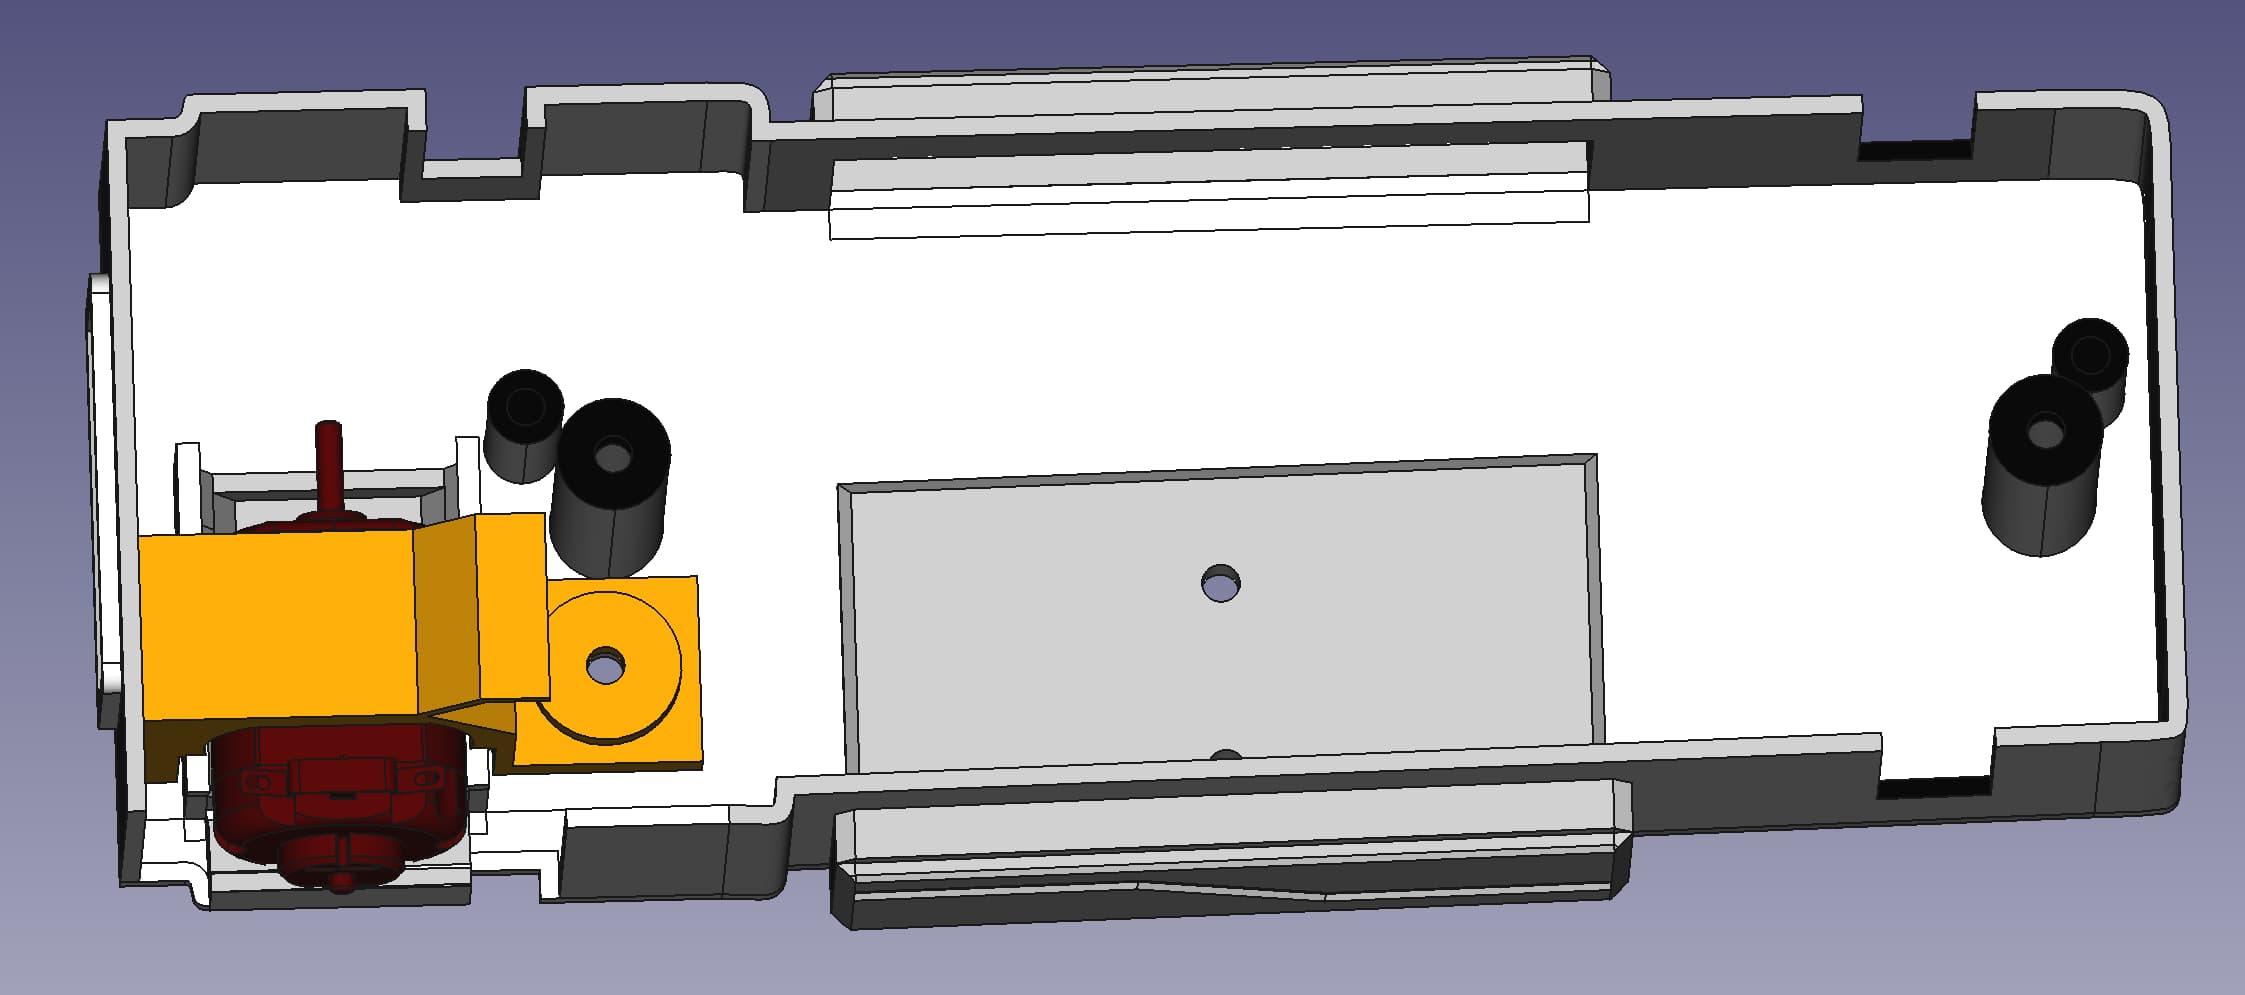 In a screenshot from FreeCAD, the white 3D model of the base of the buggy has a red motor in its corner, which in turn is covered by a yellow motor bracket with a screw hole